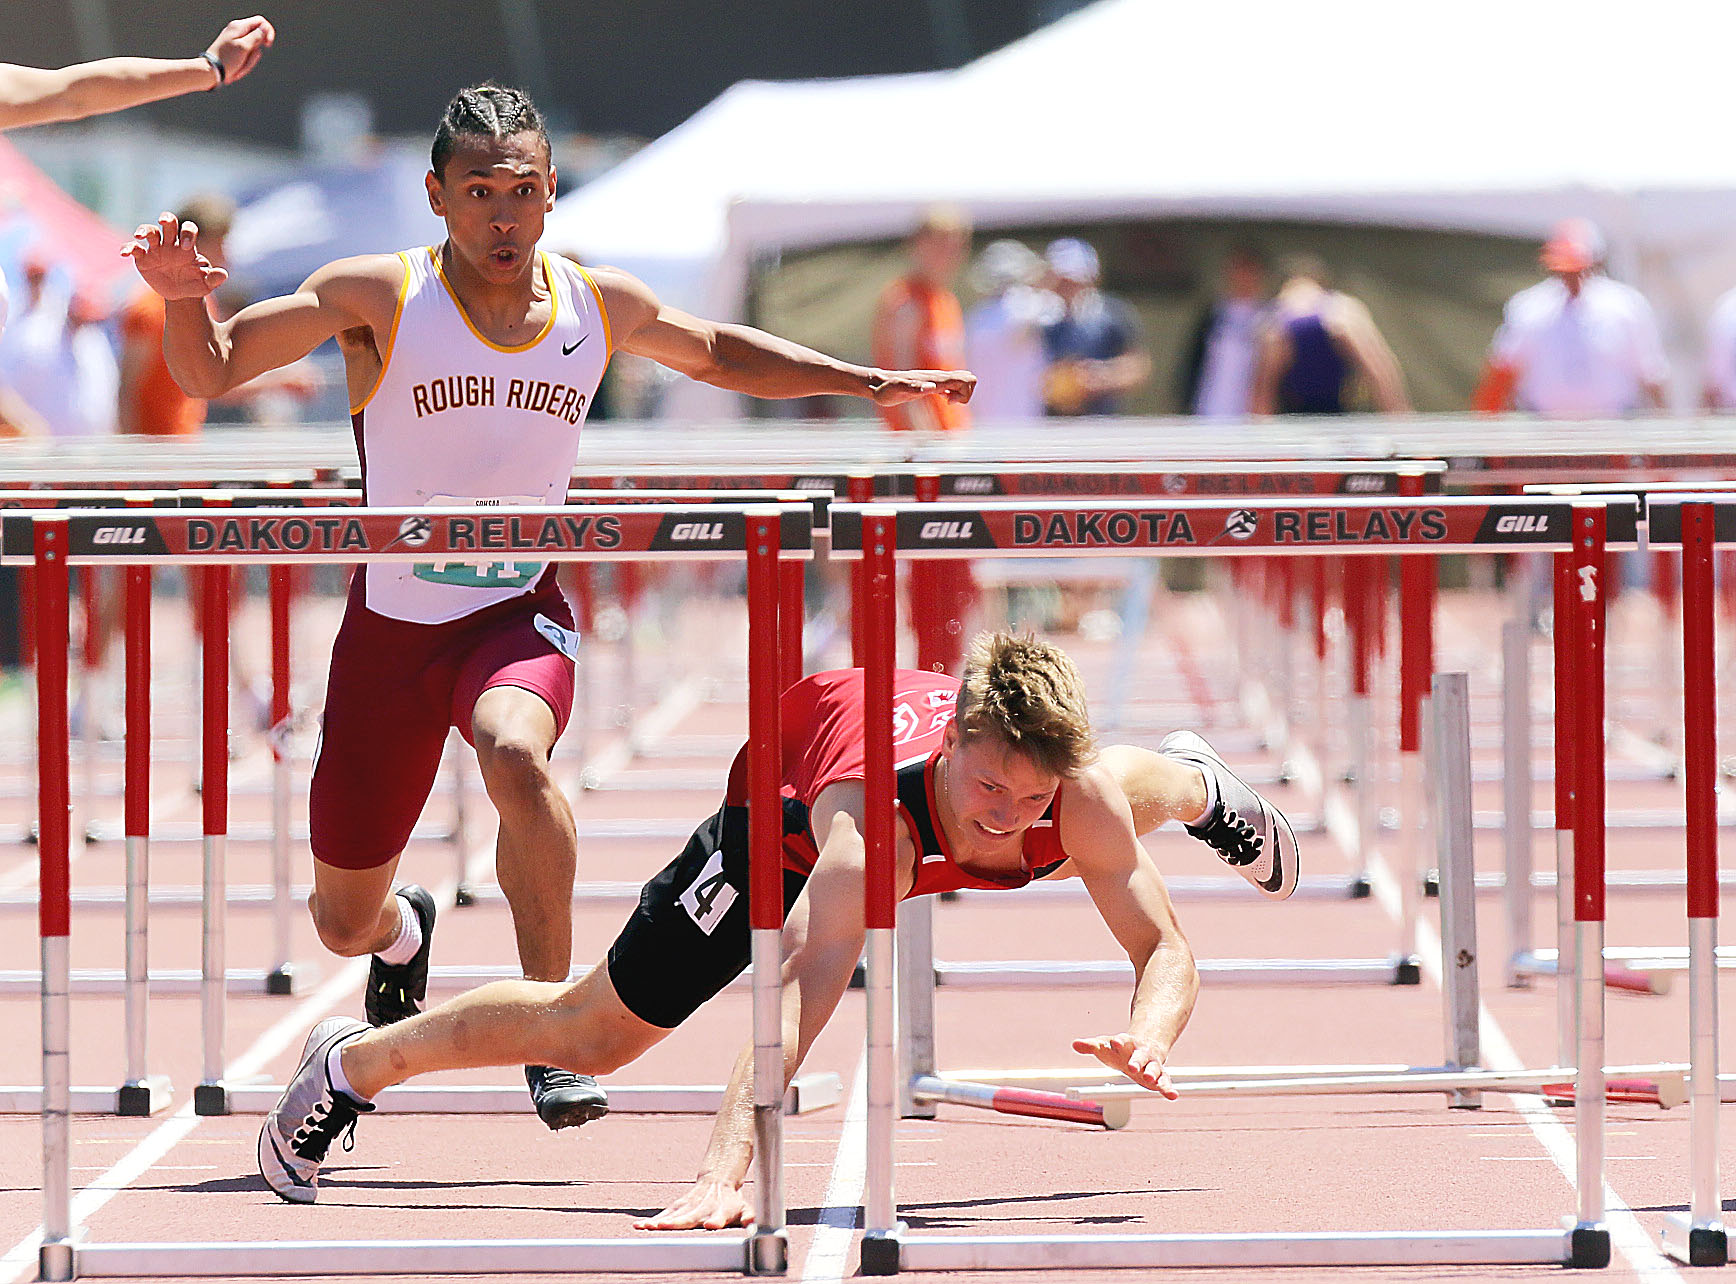 LATEST PHOTOS from Day 2 of the SD State Track Meet in Sioux Falls 